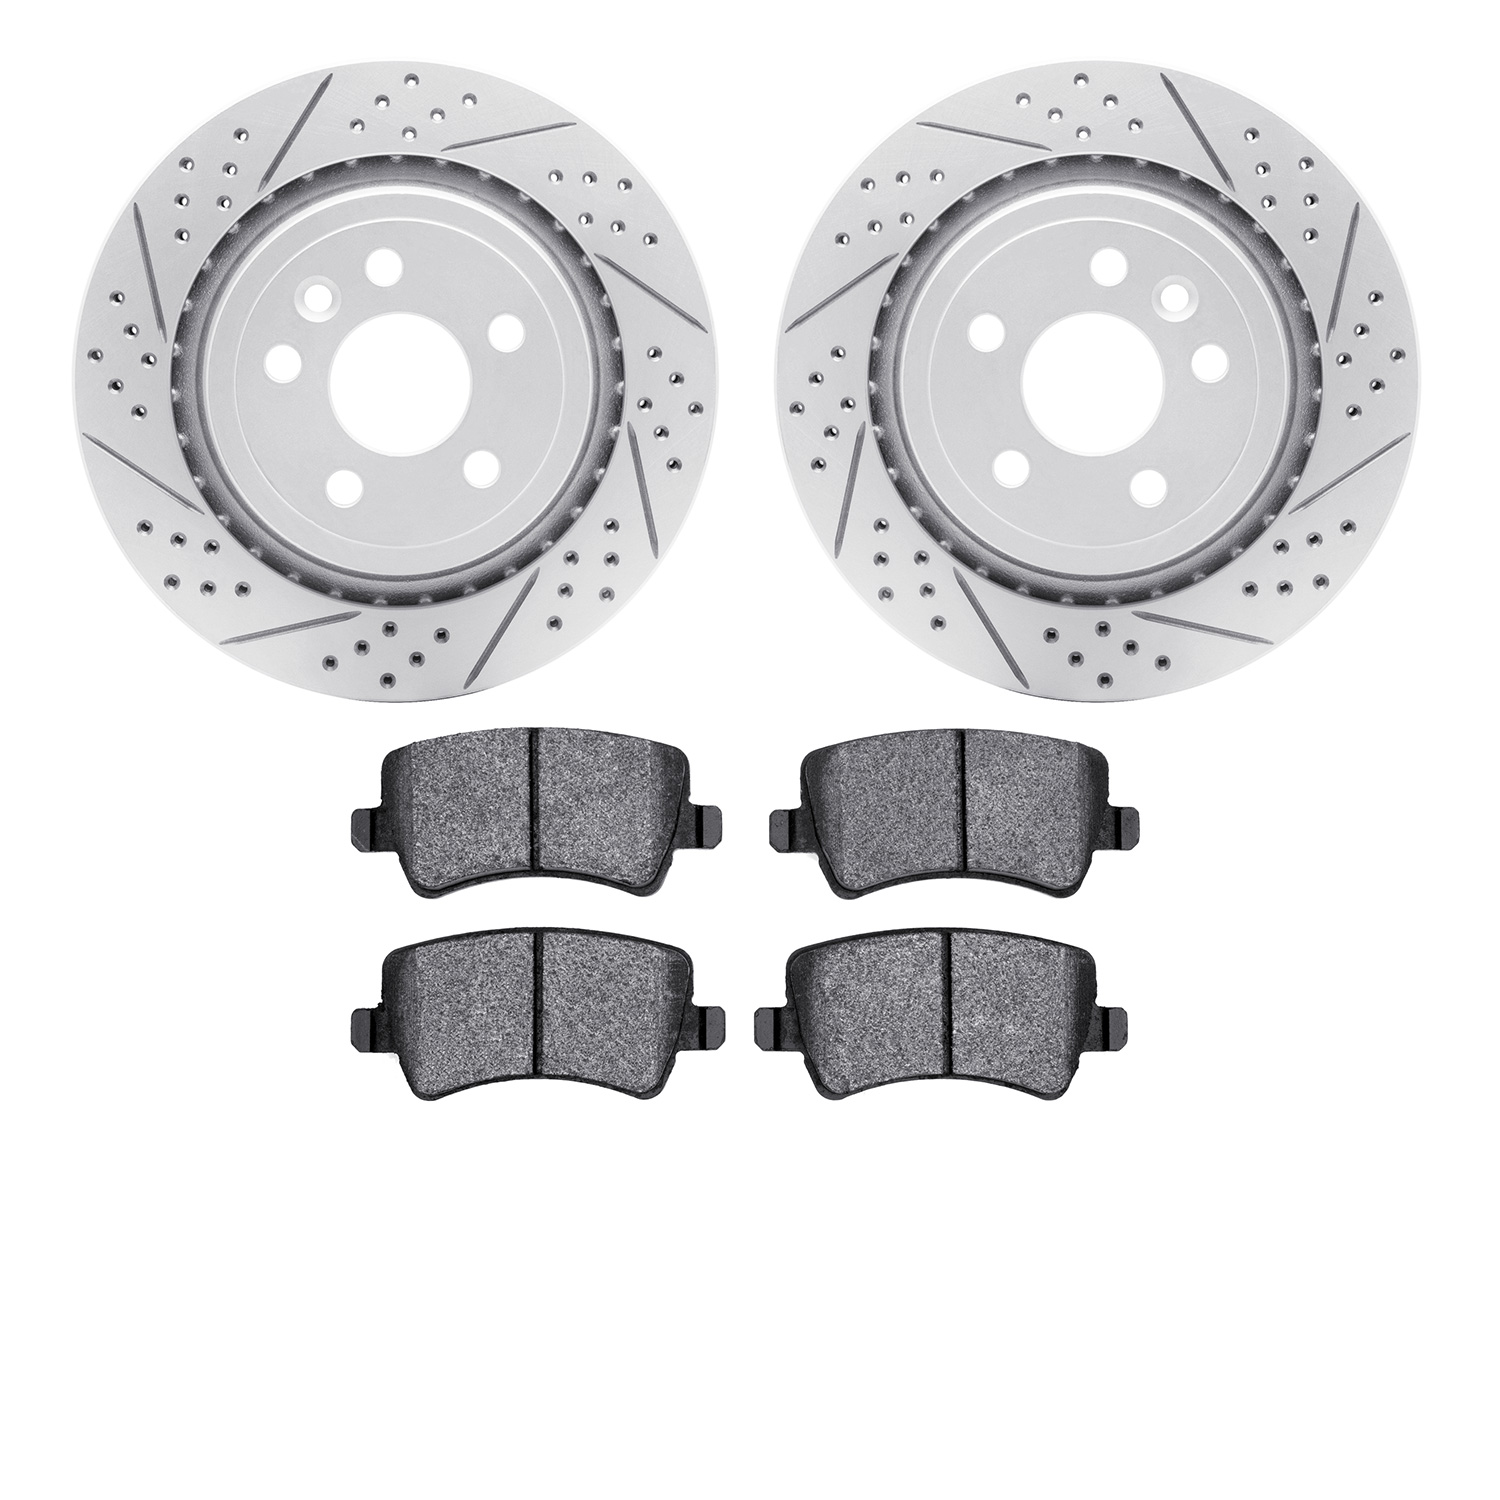 2502-27030 Geoperformance Drilled/Slotted Rotors w/5000 Advanced Brake Pads Kit, 2007-2015 Volvo, Position: Rear